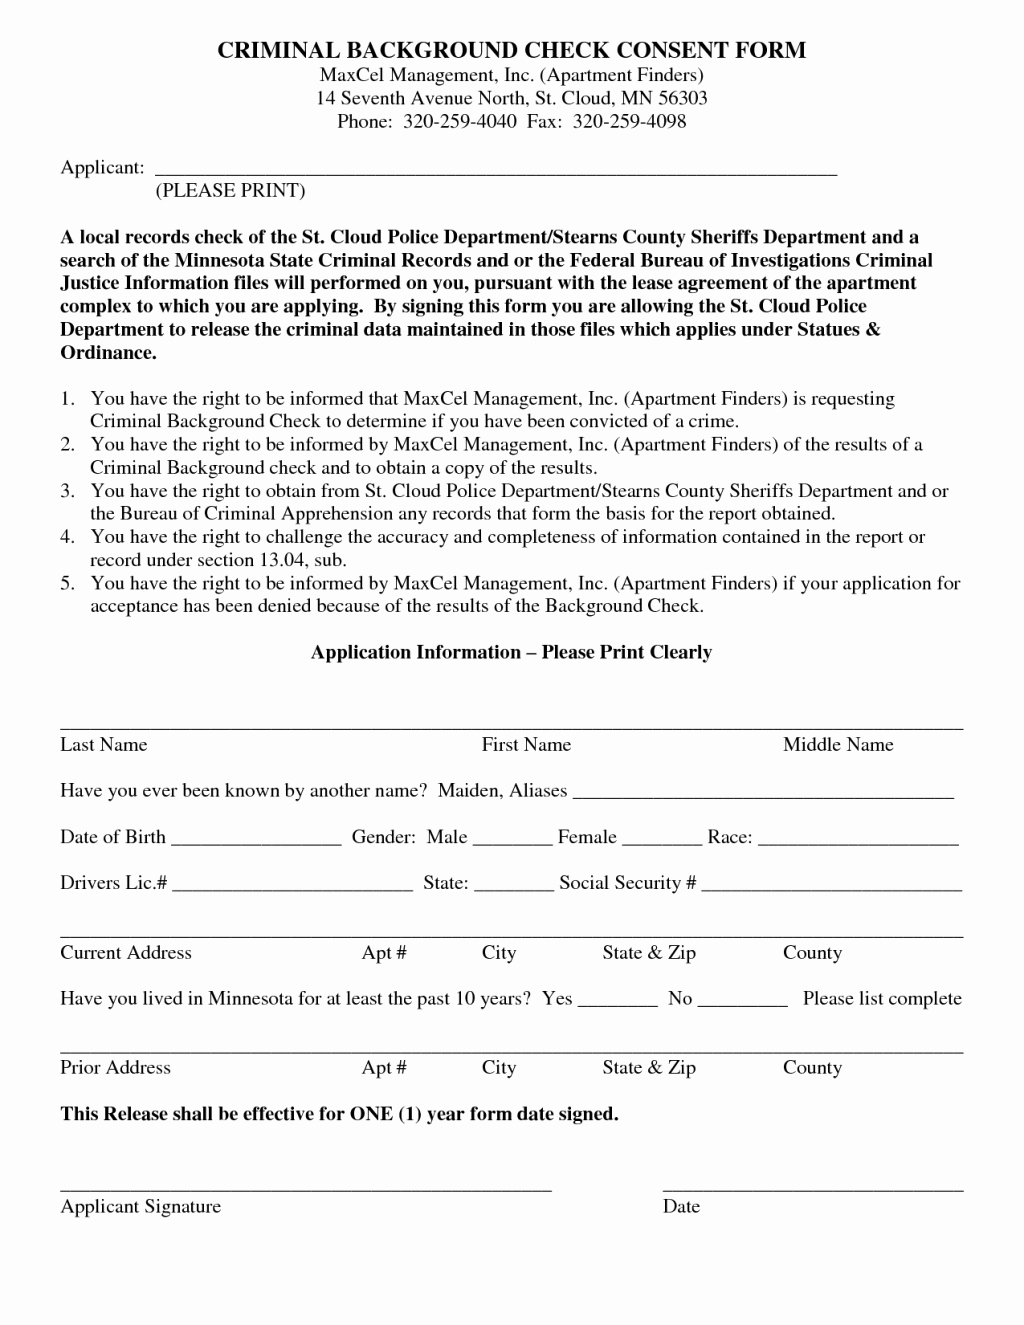 Background Check Consent form